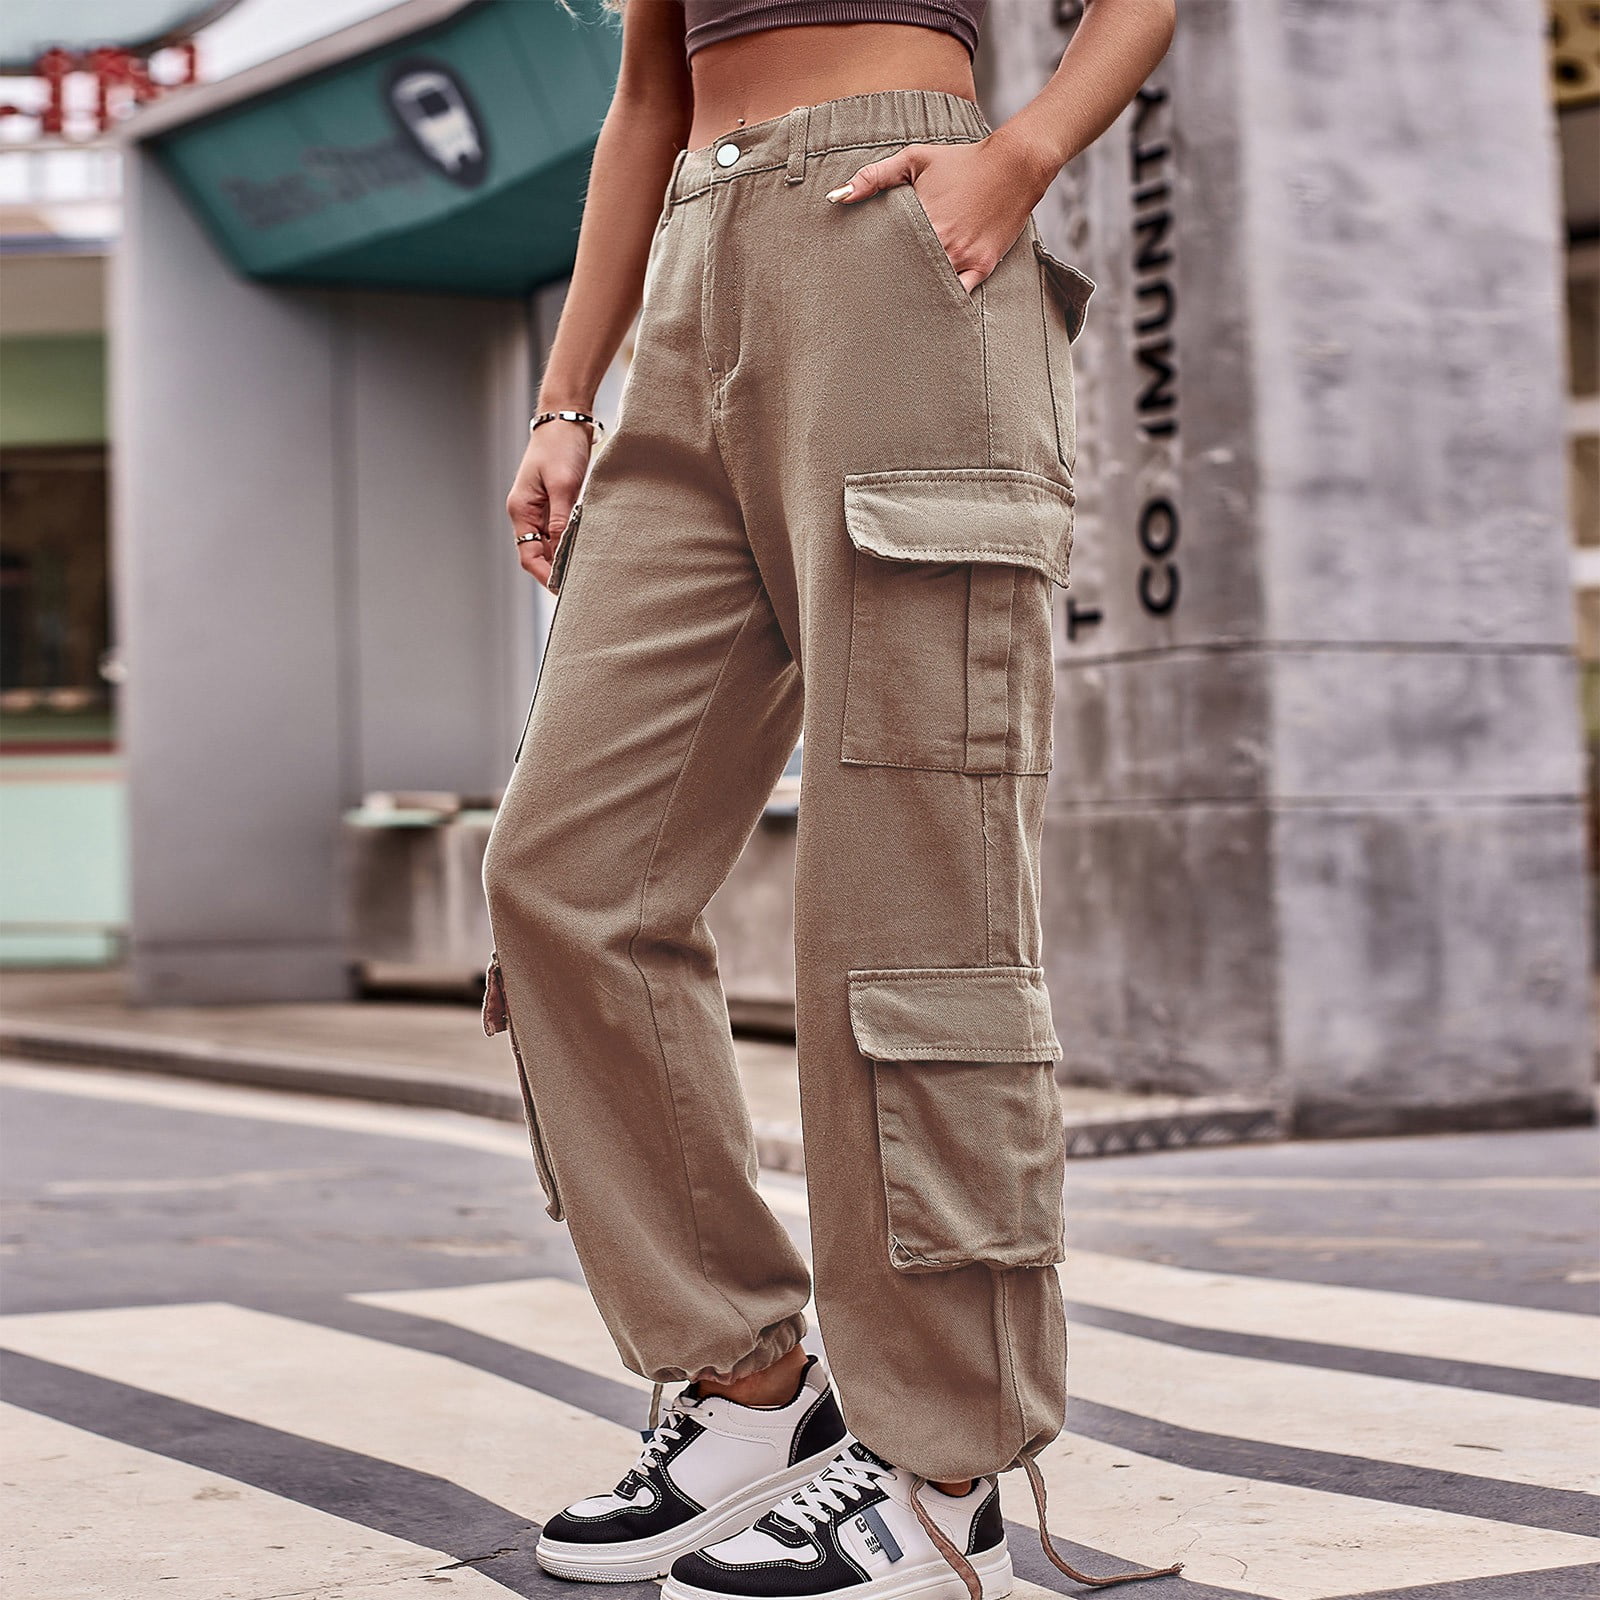 HIMIWAY Cargo Pants Women Palazzo Pants for Women Women's Fashion Casual  Solid Color Drawstring Jeans Overalls Sports Pants Khaki C M 